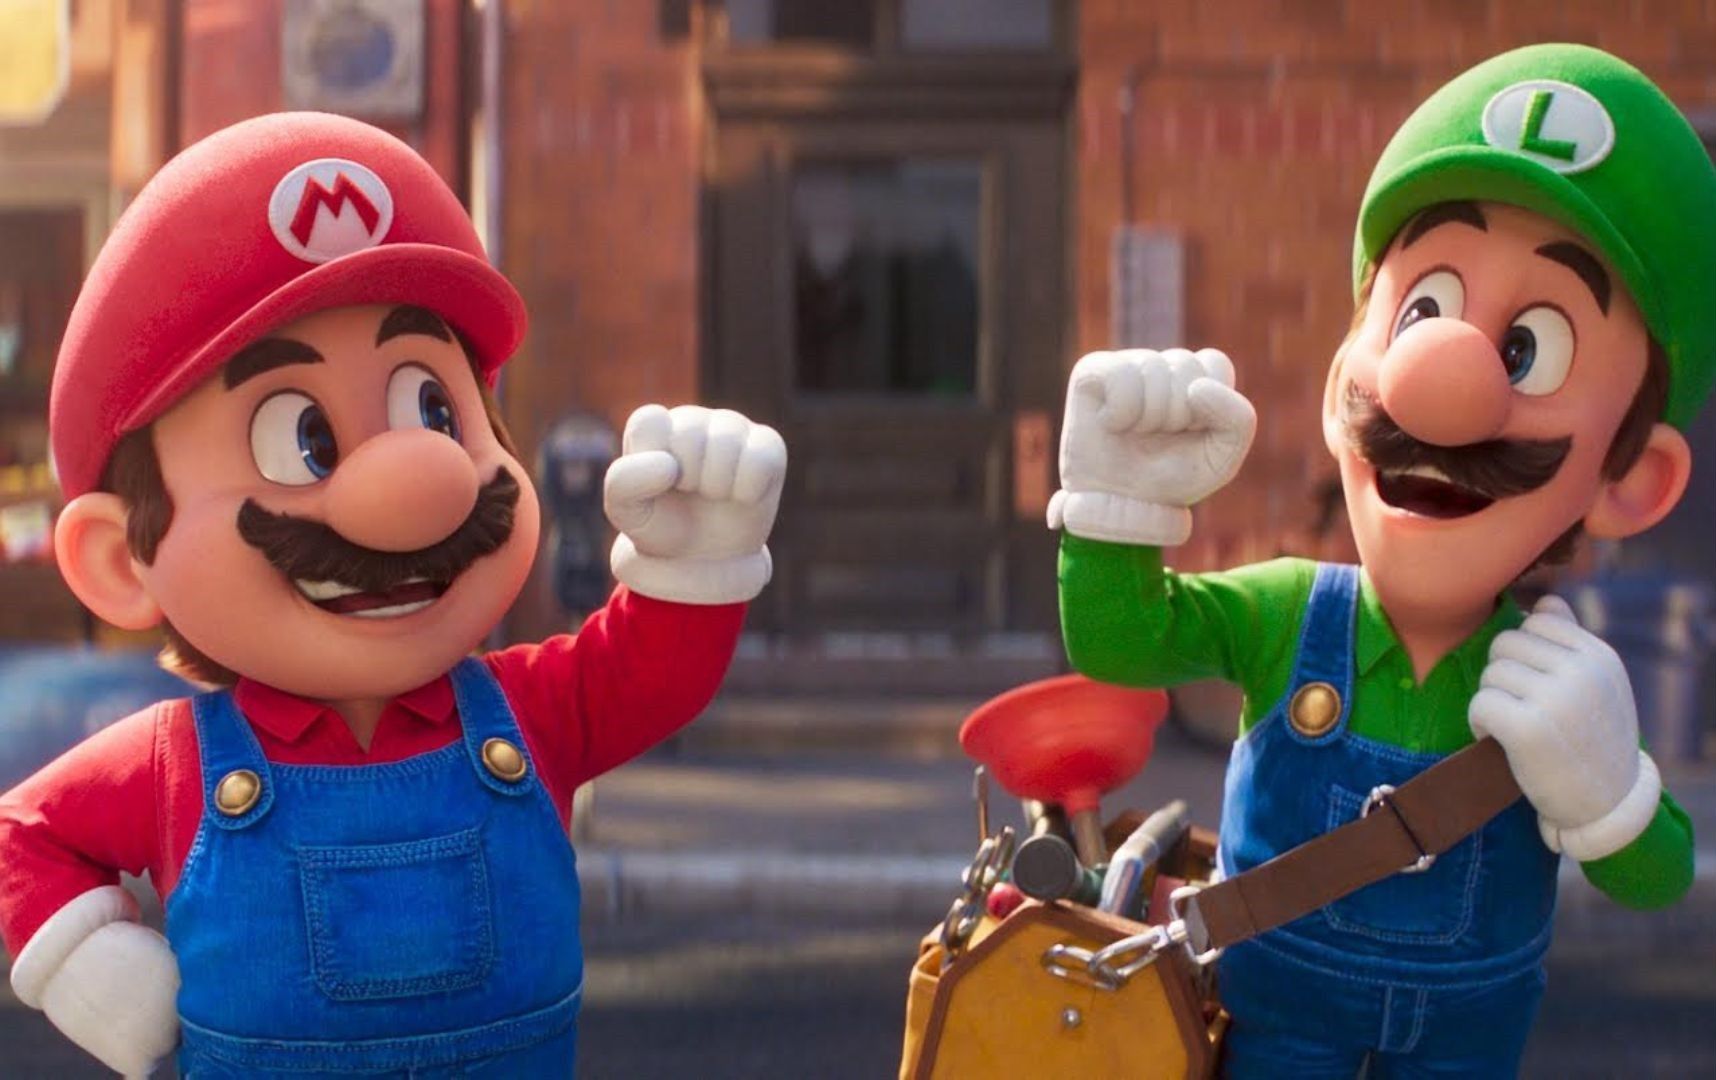 Let's-a-go play the game: 'The Super Mario Bros. Movie' review